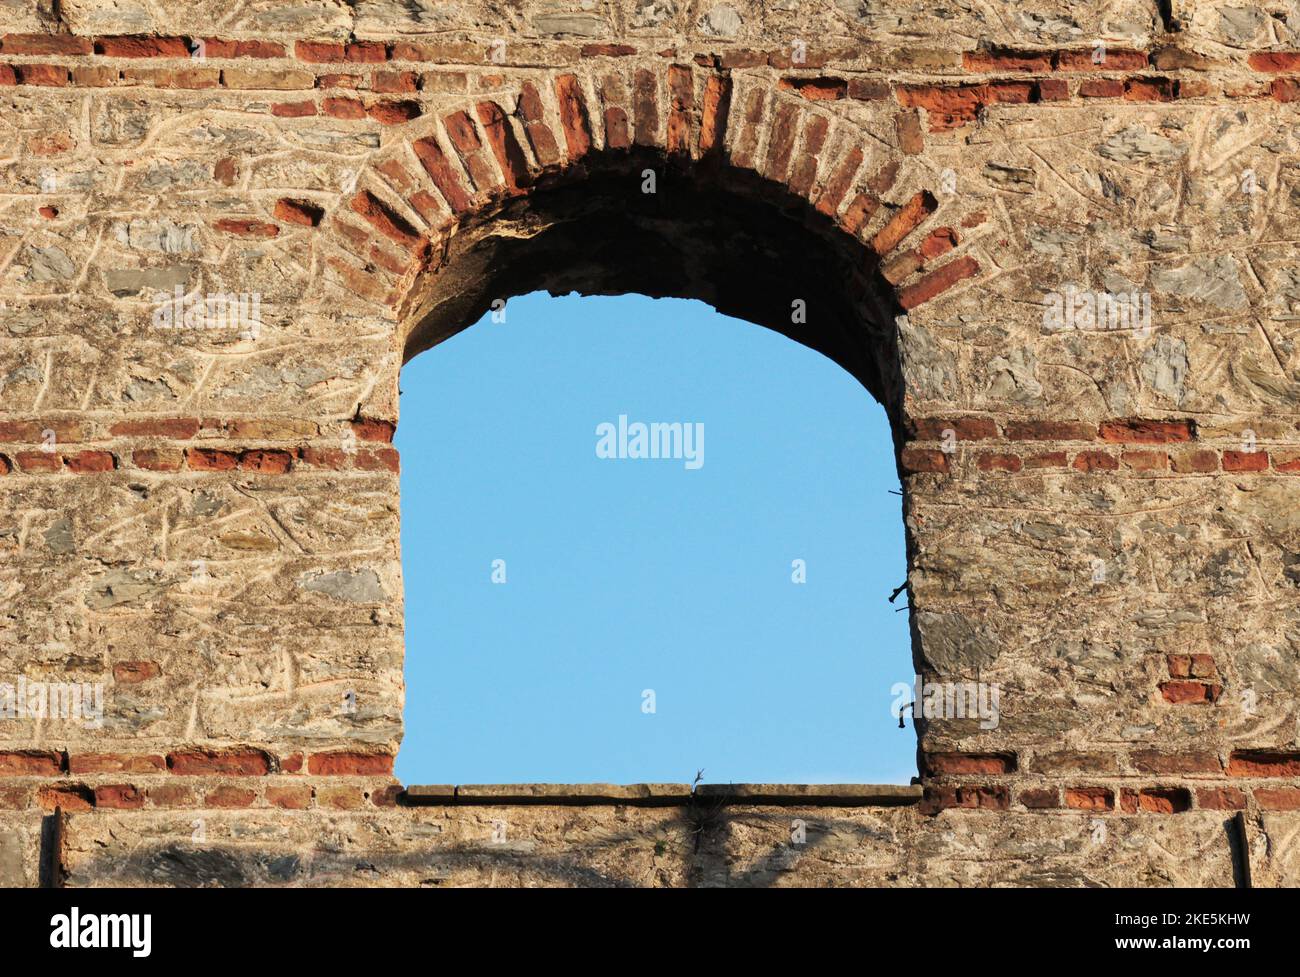 oval window in brick building opening to sky, aged round window, old ottoman build Stock Photo